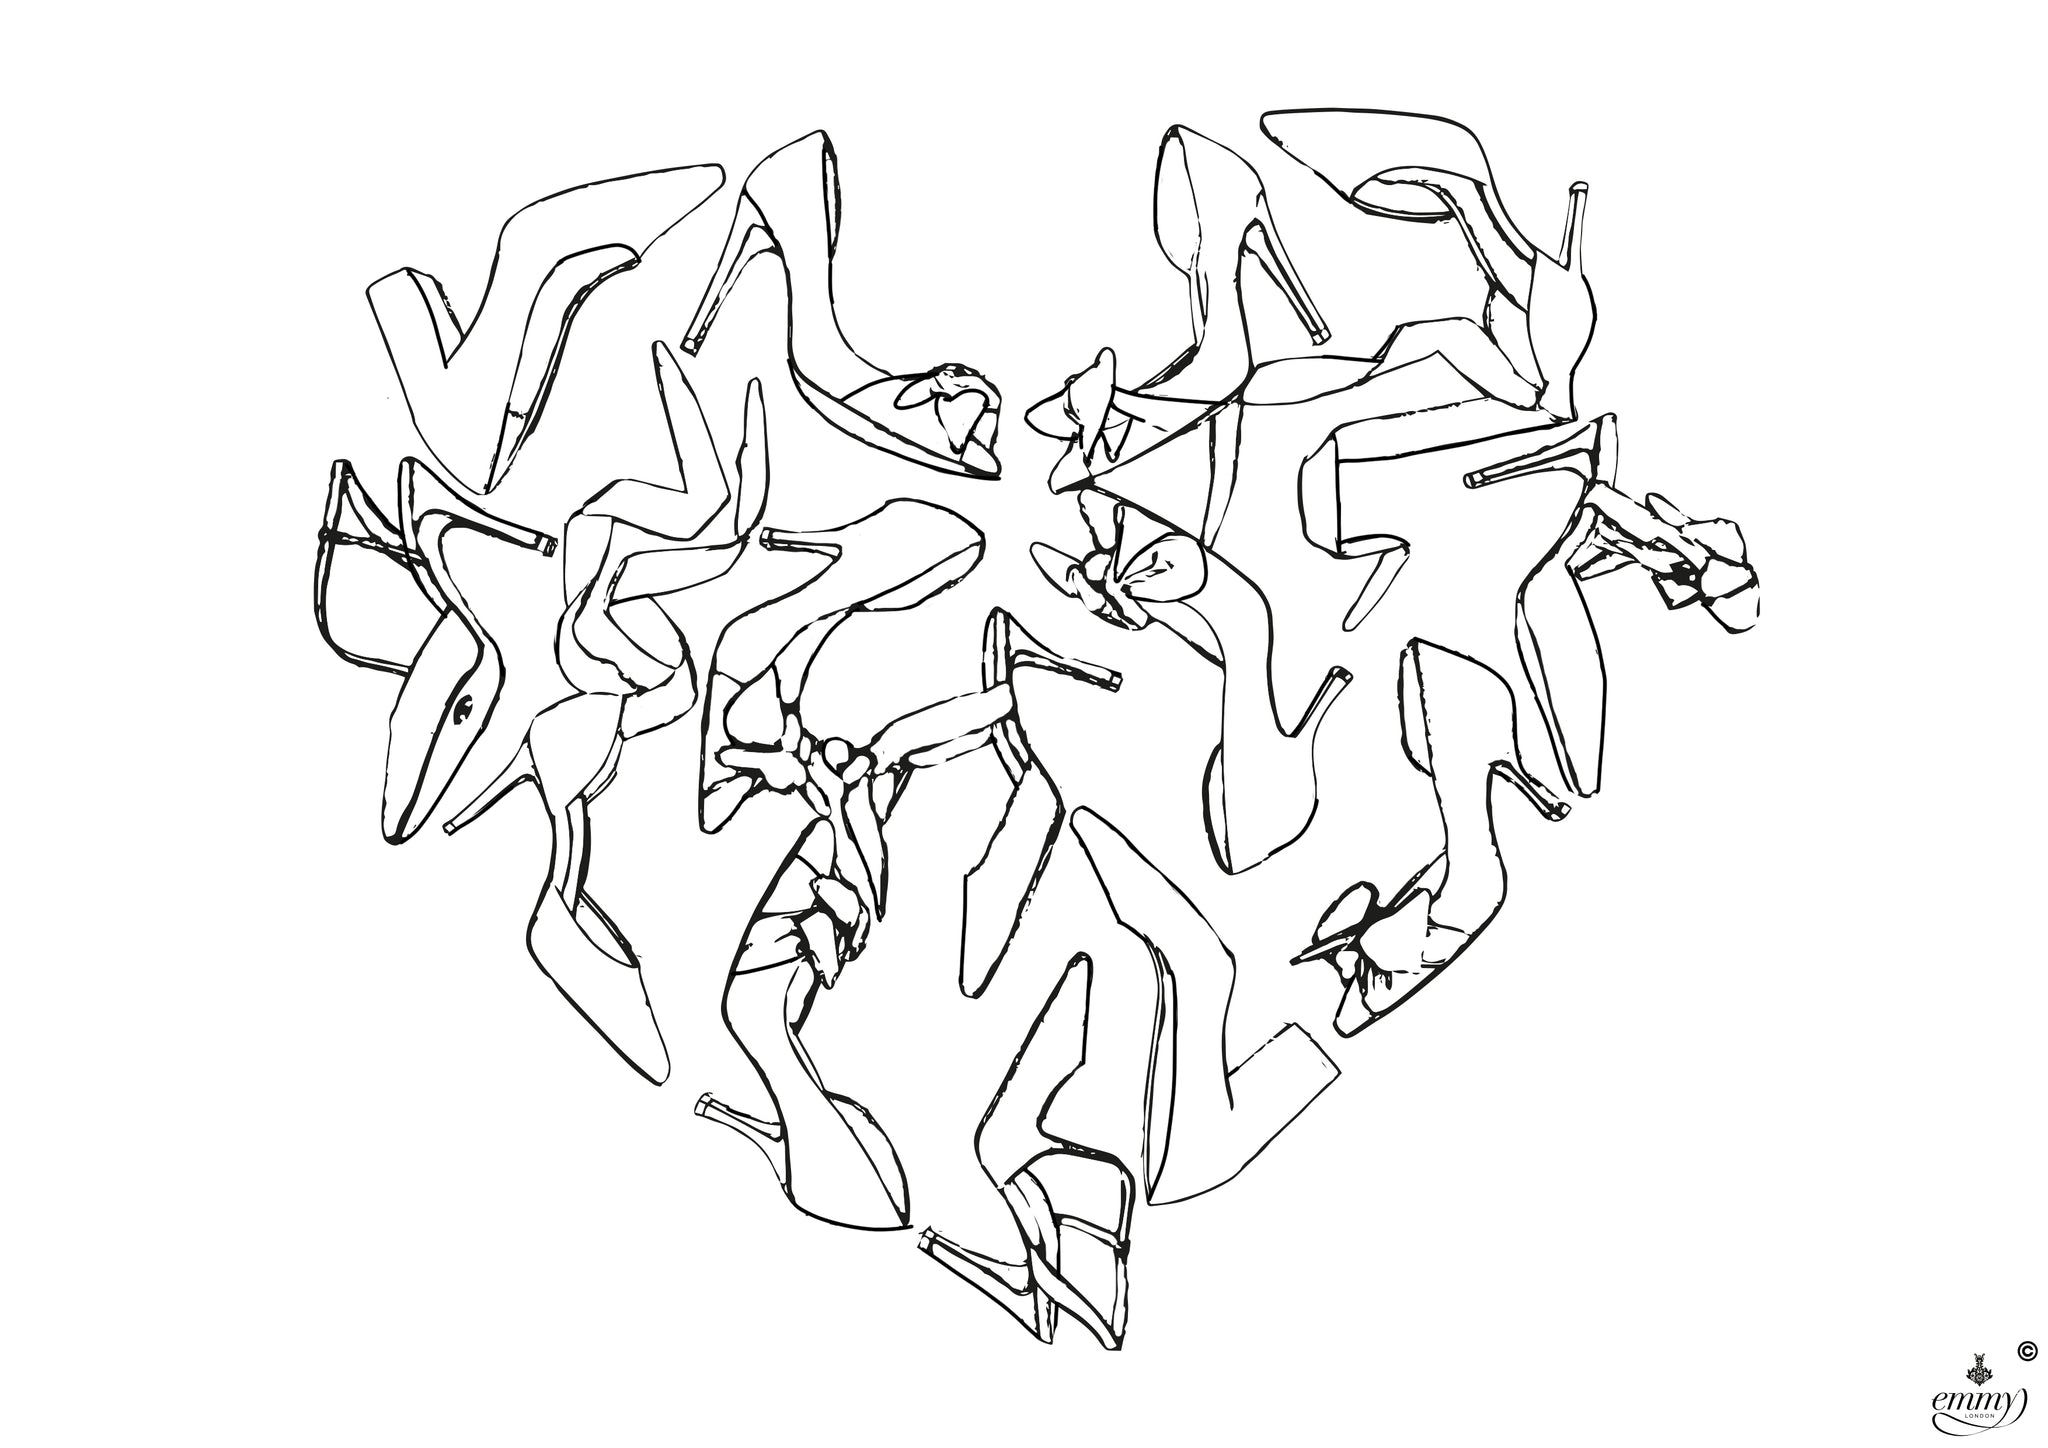 SHoe Heart Colouring Page By Emmy London